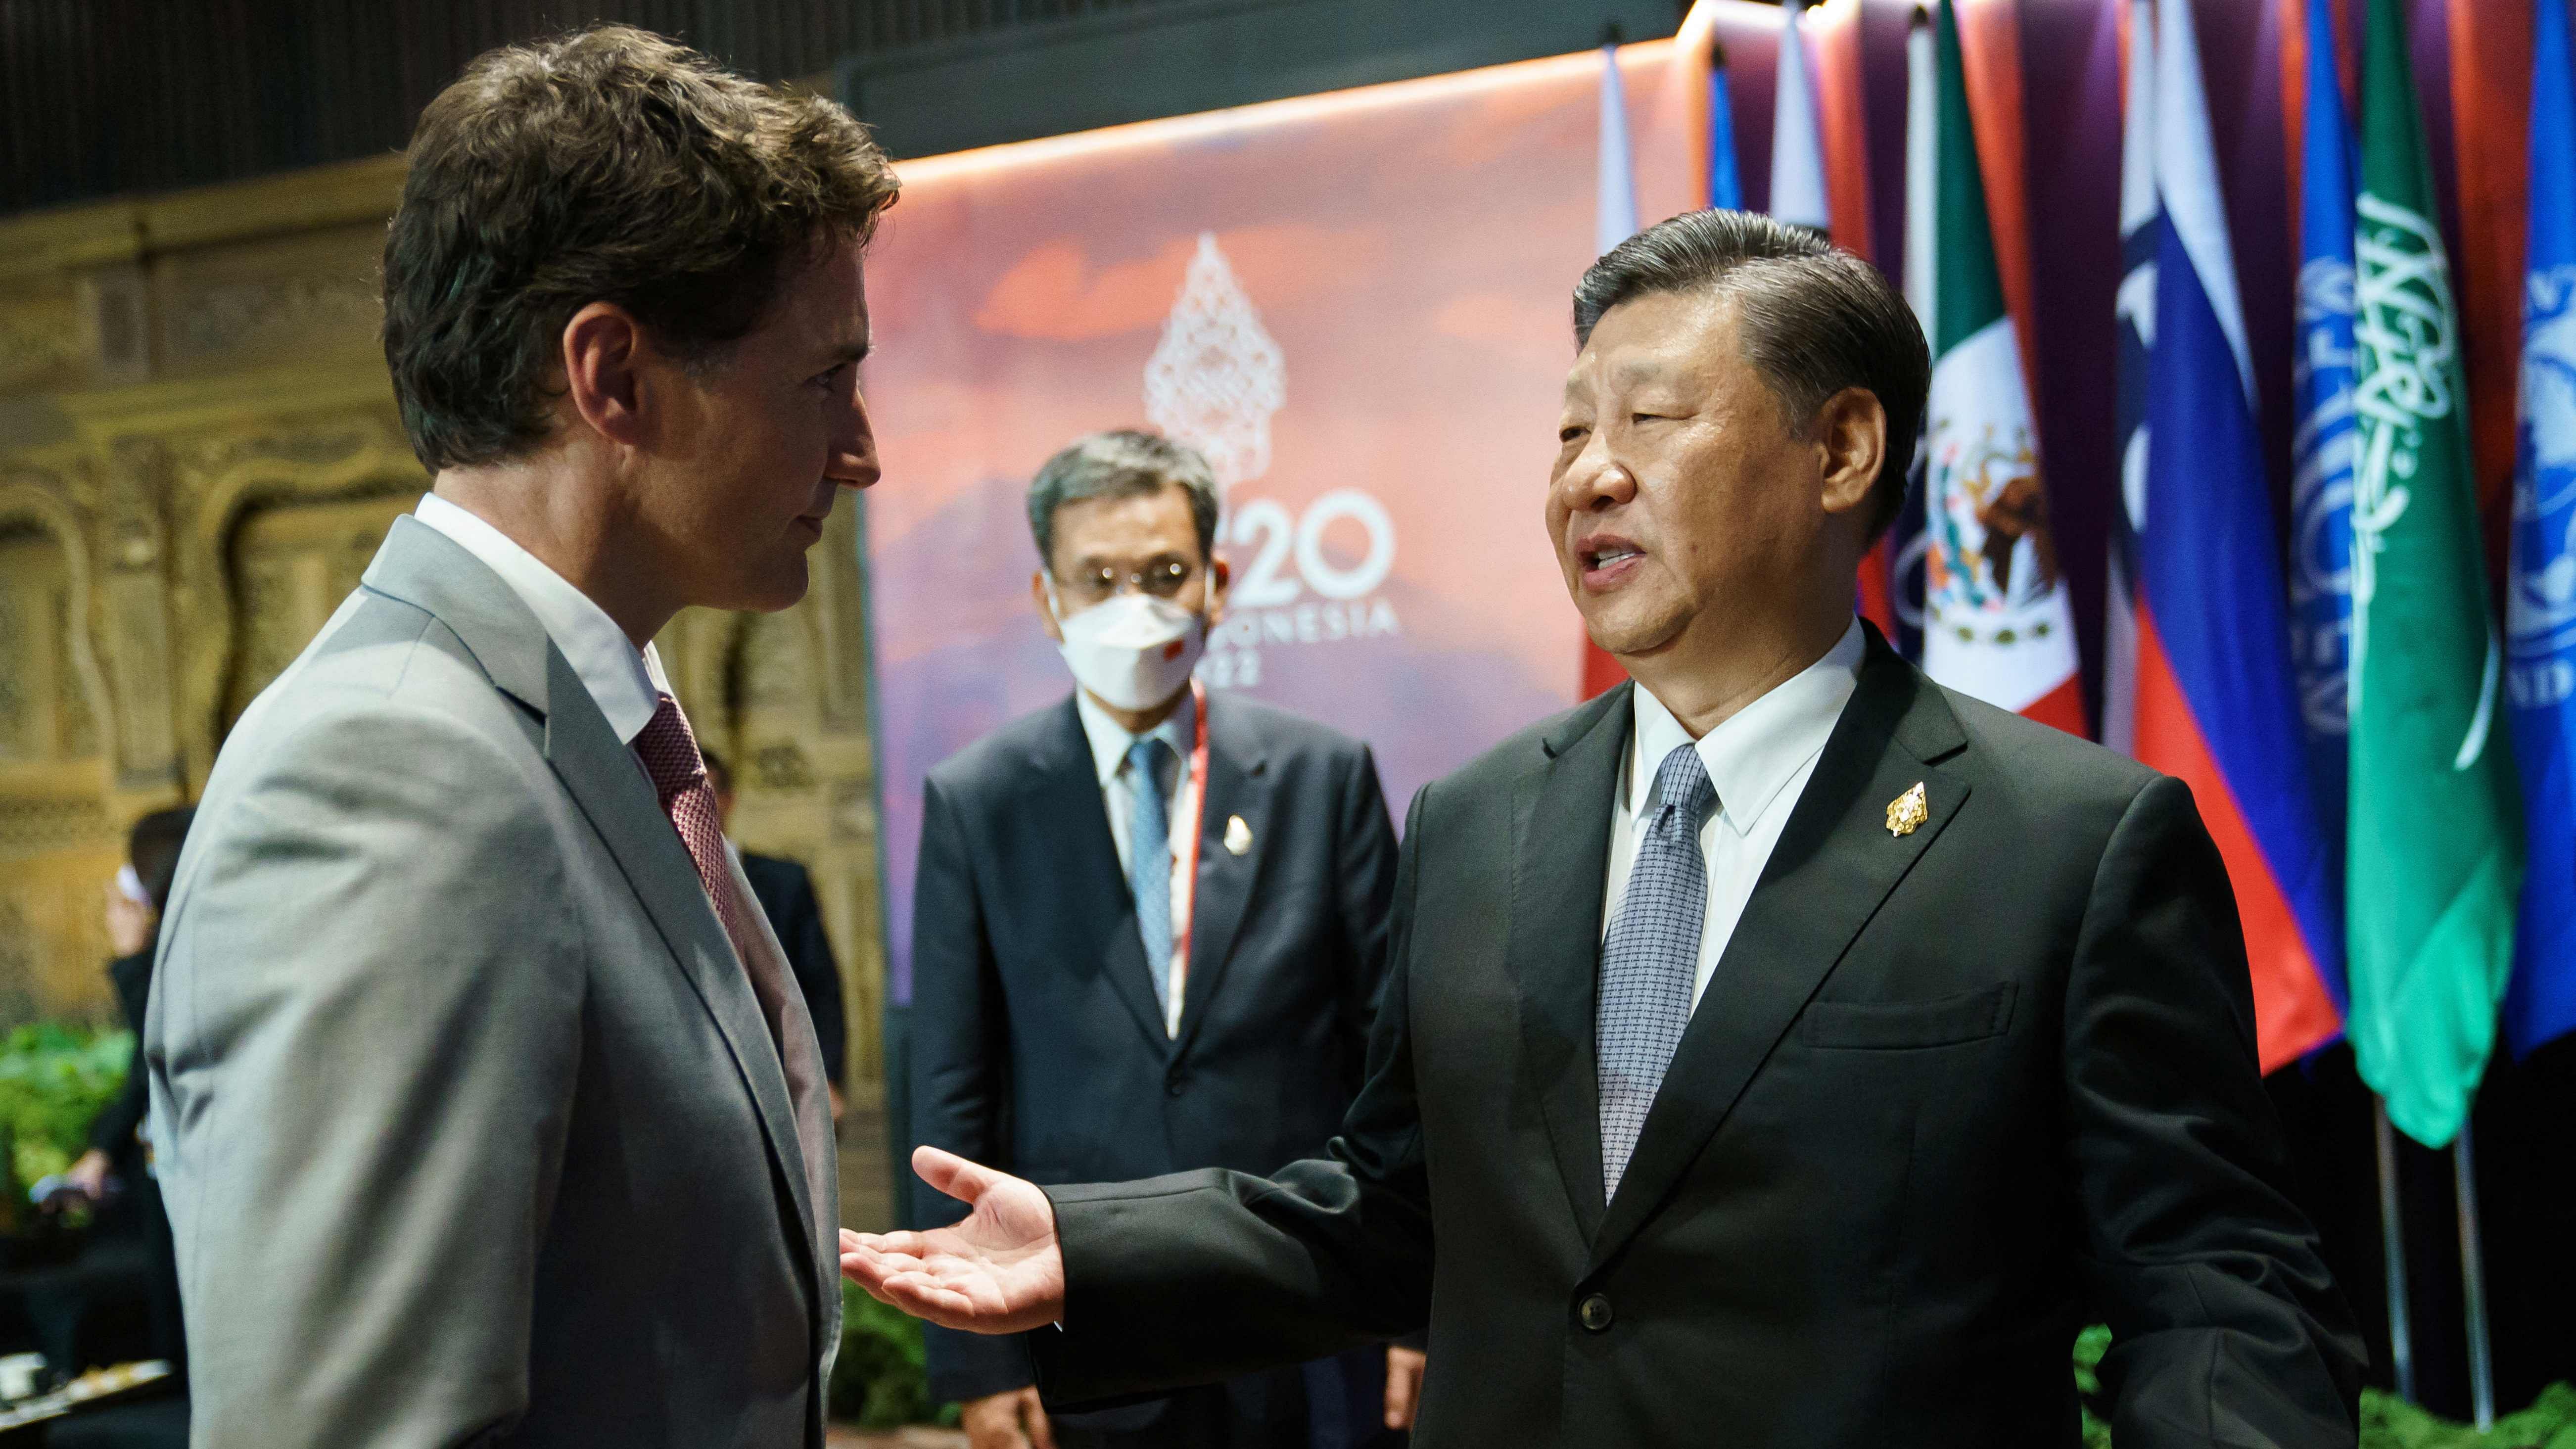 Canada's Prime Minister Justin Trudeau speaks with China's President Xi Jinping at the G20 summit. Credit: Reuters Photo